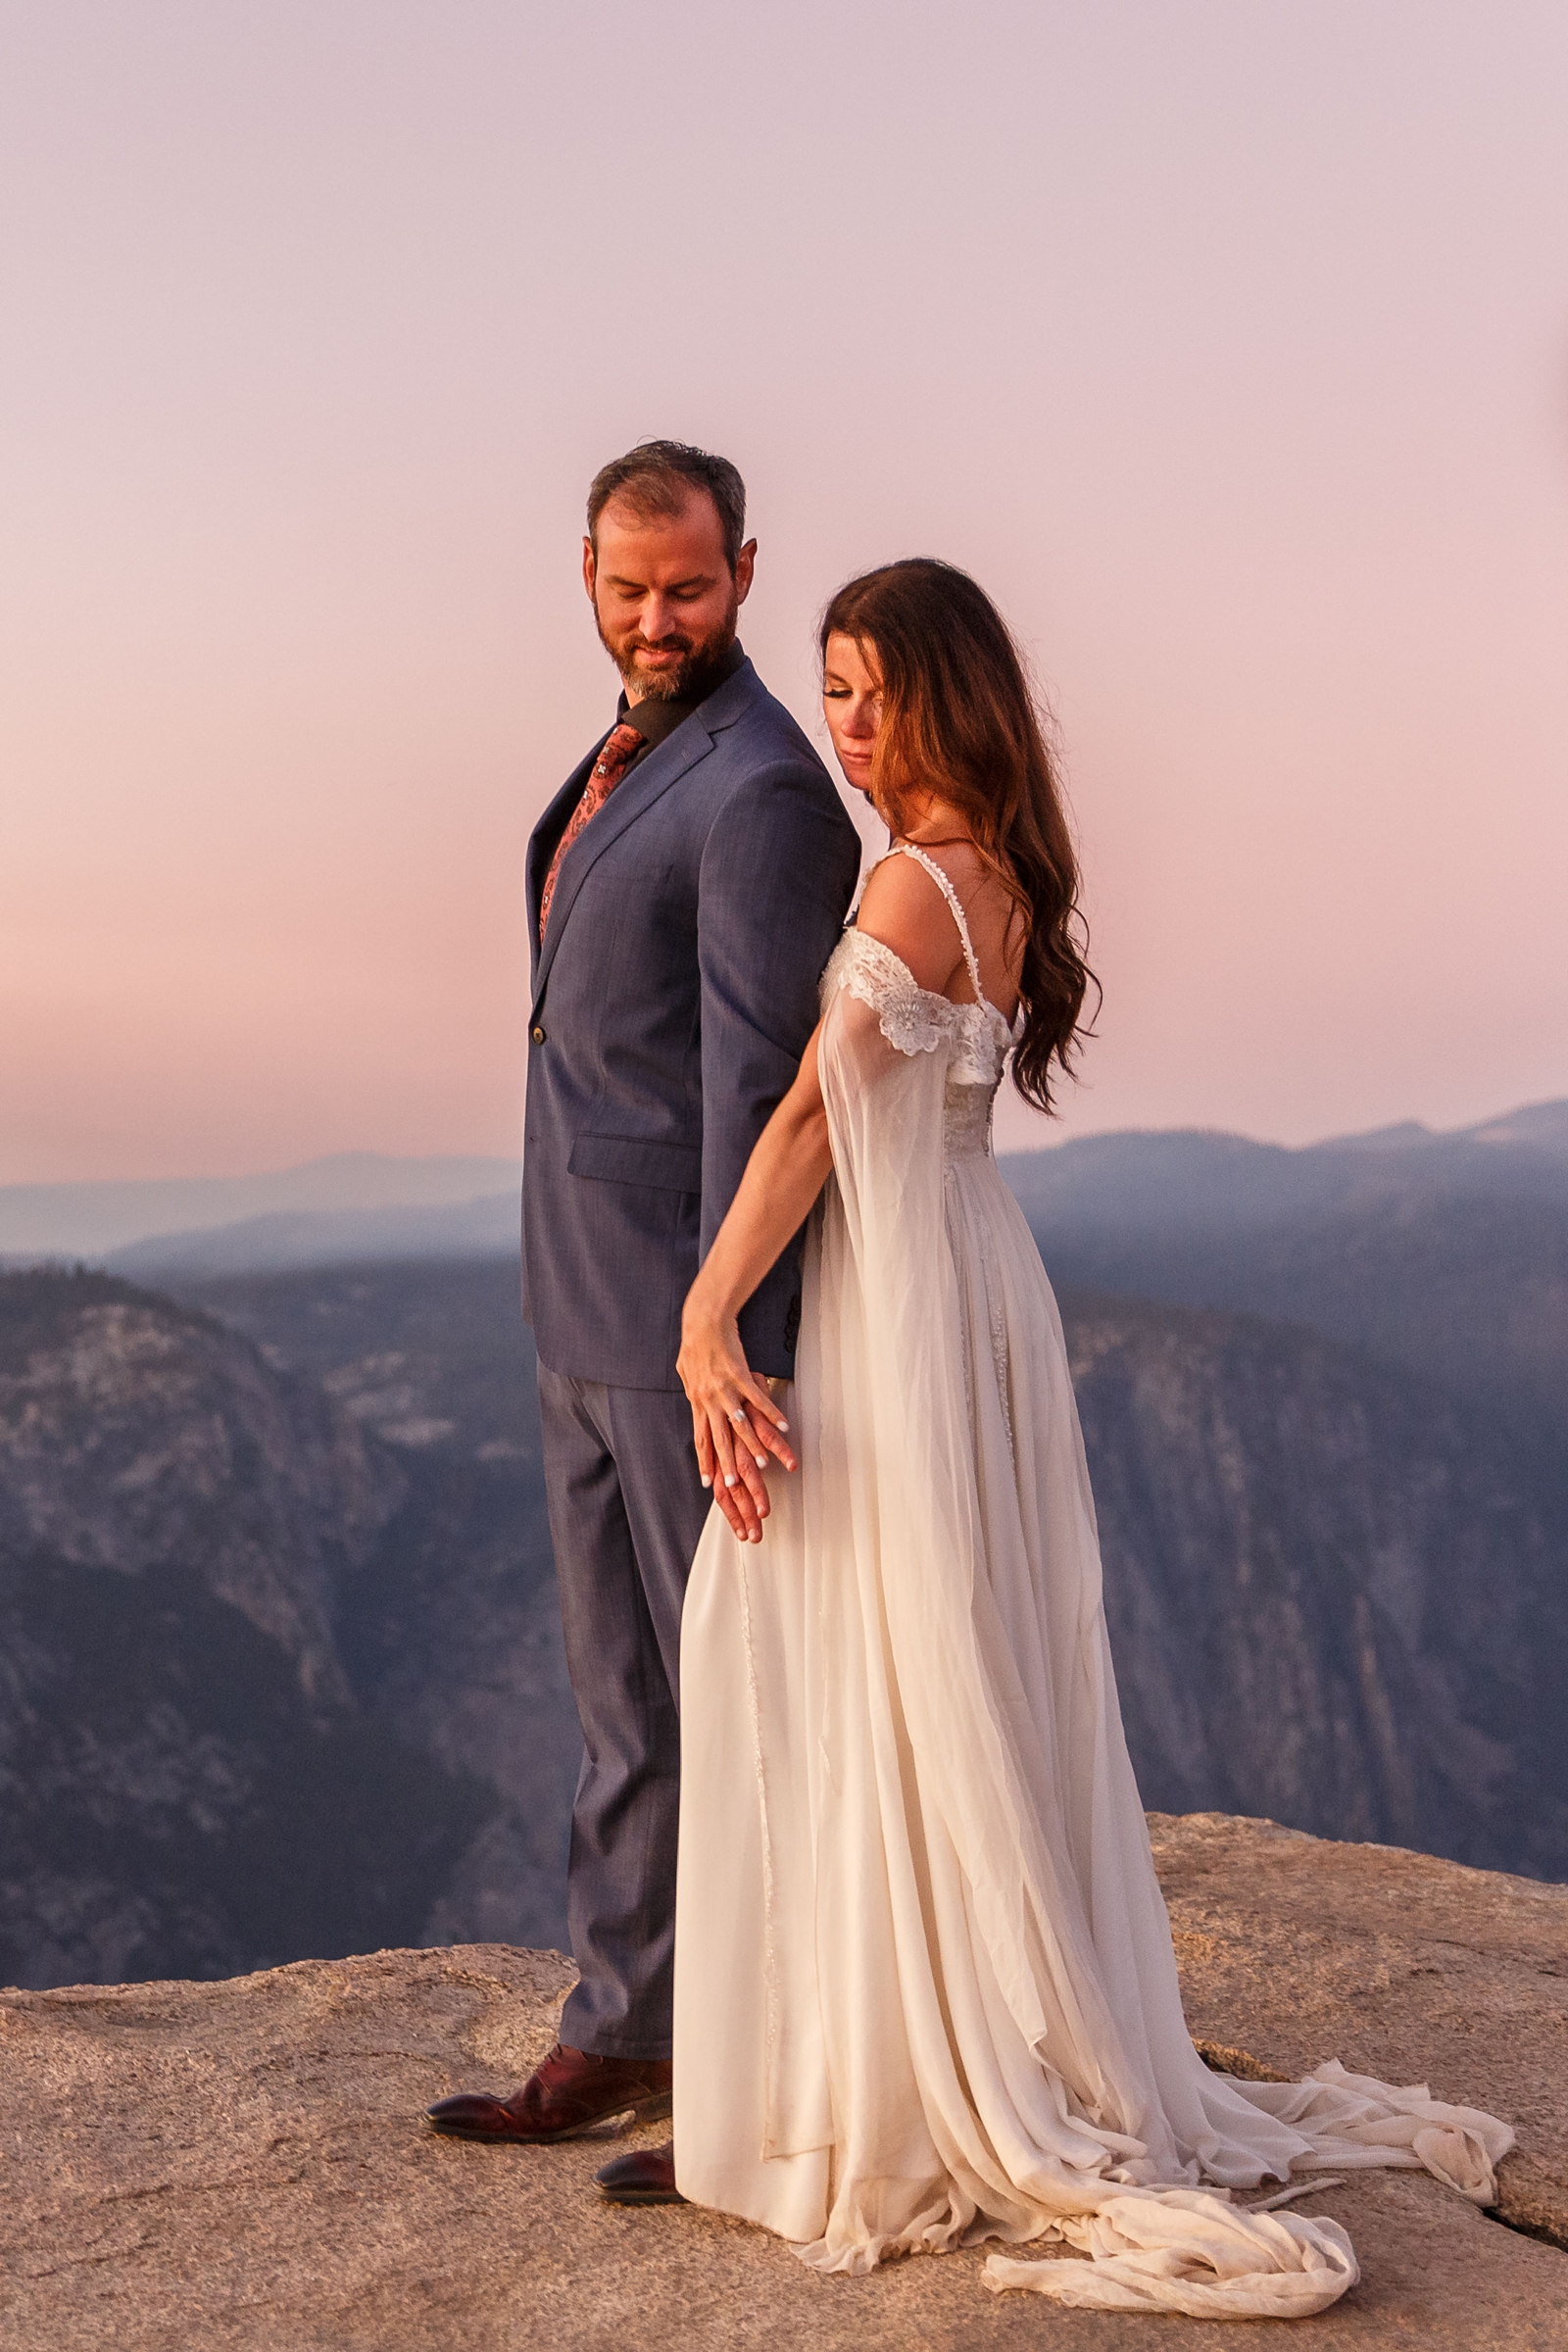 This couple had a romantic elopement at sunset in Yosemite NP.